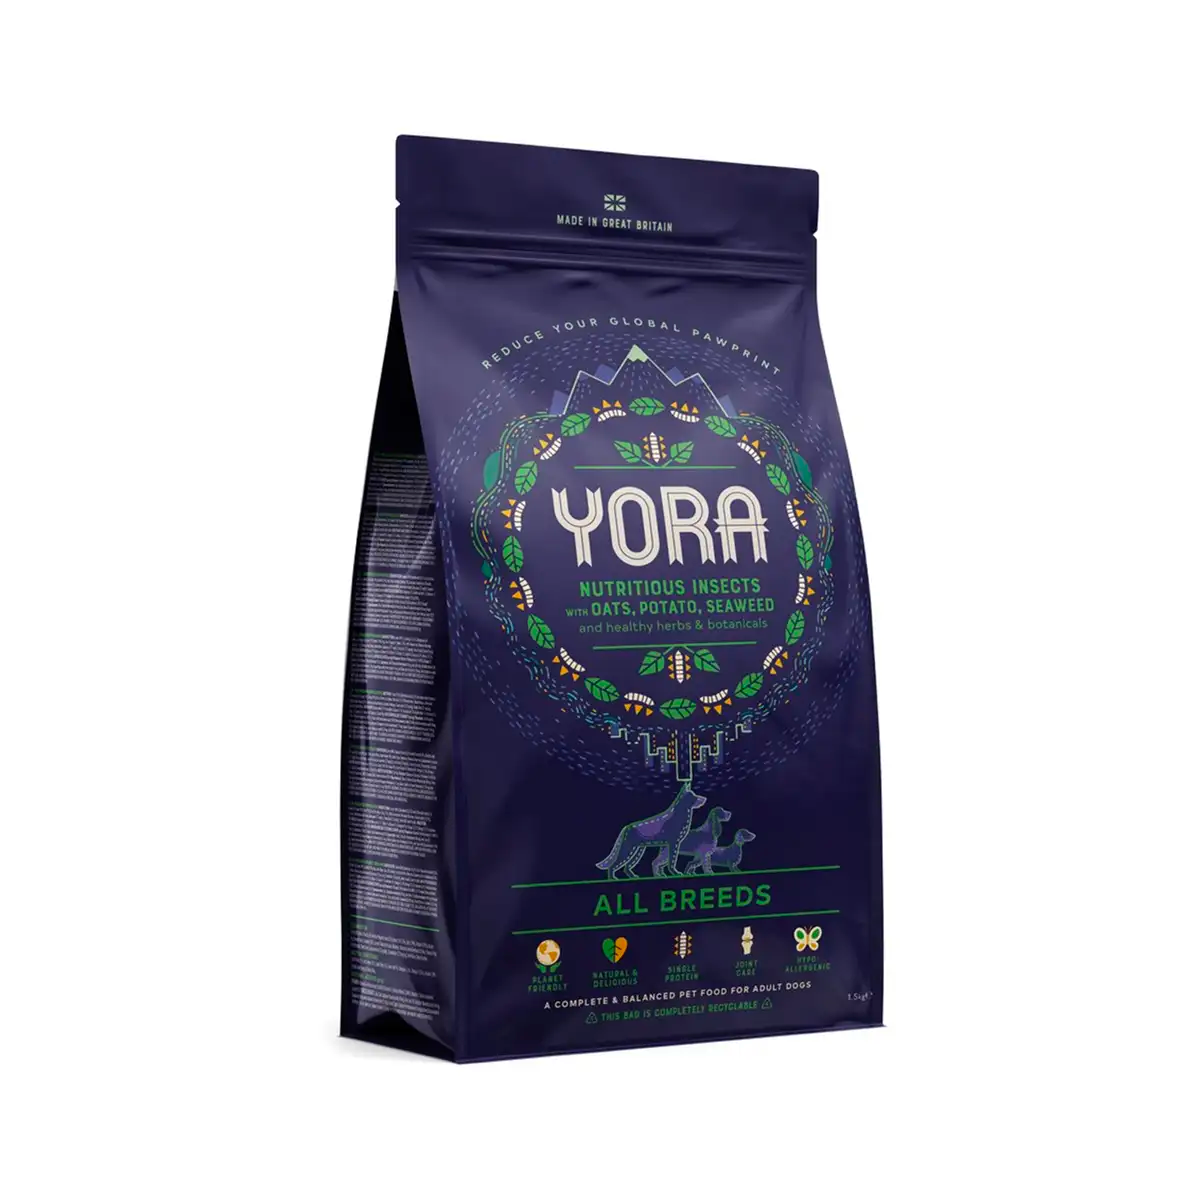 Yora - Complete Insect Based Adult Dog Food